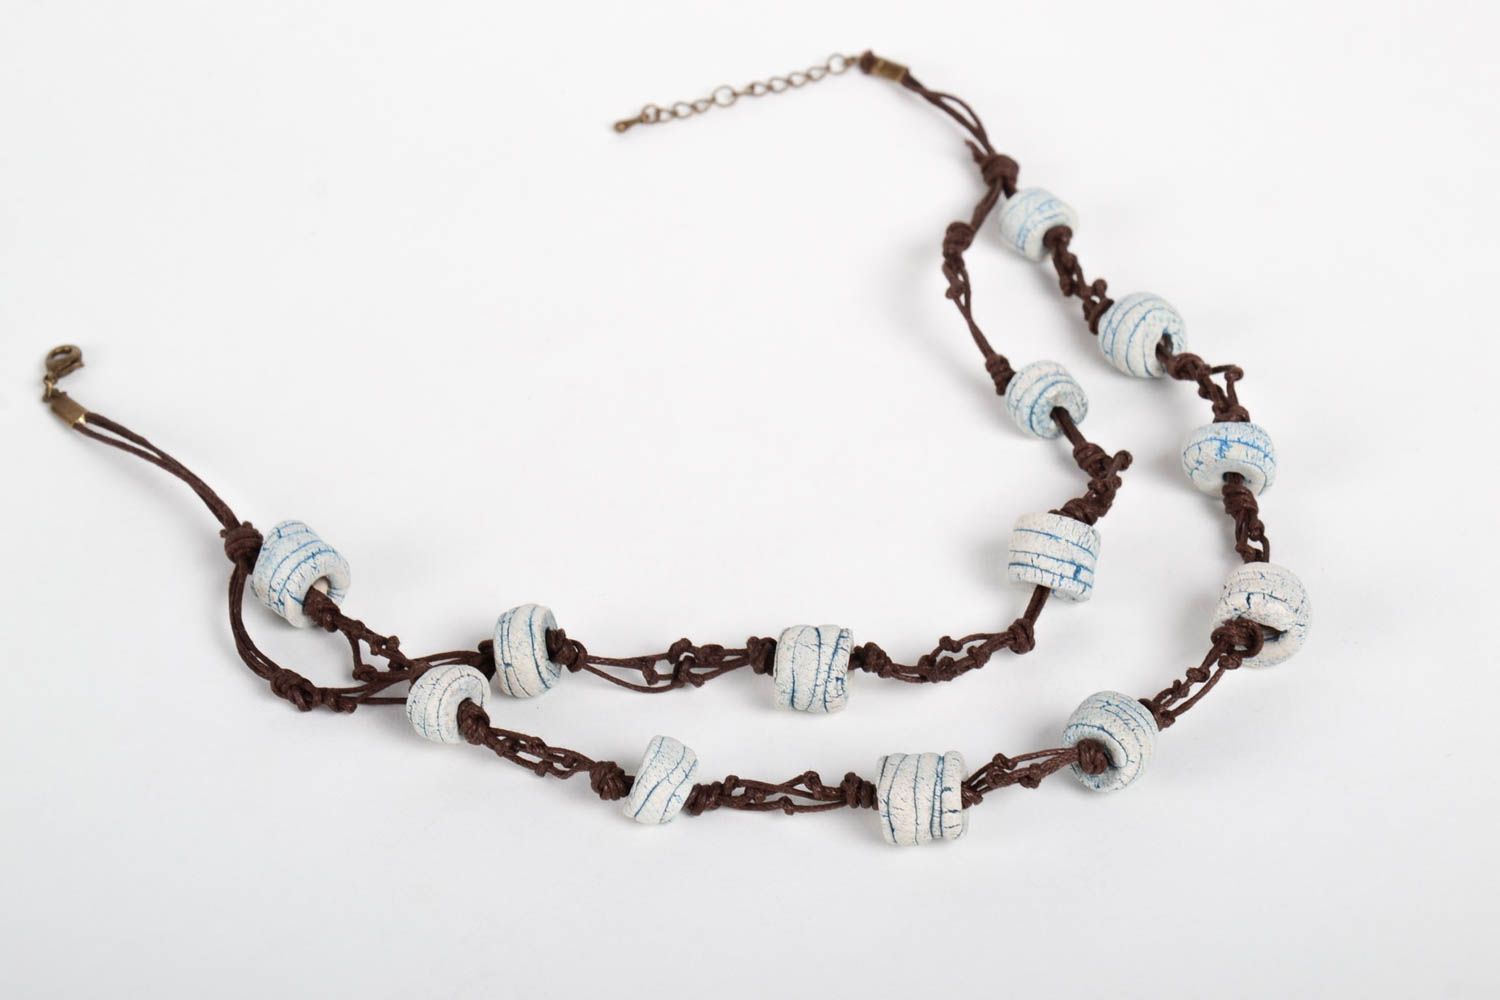 Beaded necklace handmade designer accessory ceramic bijouterie with waxed lace photo 4